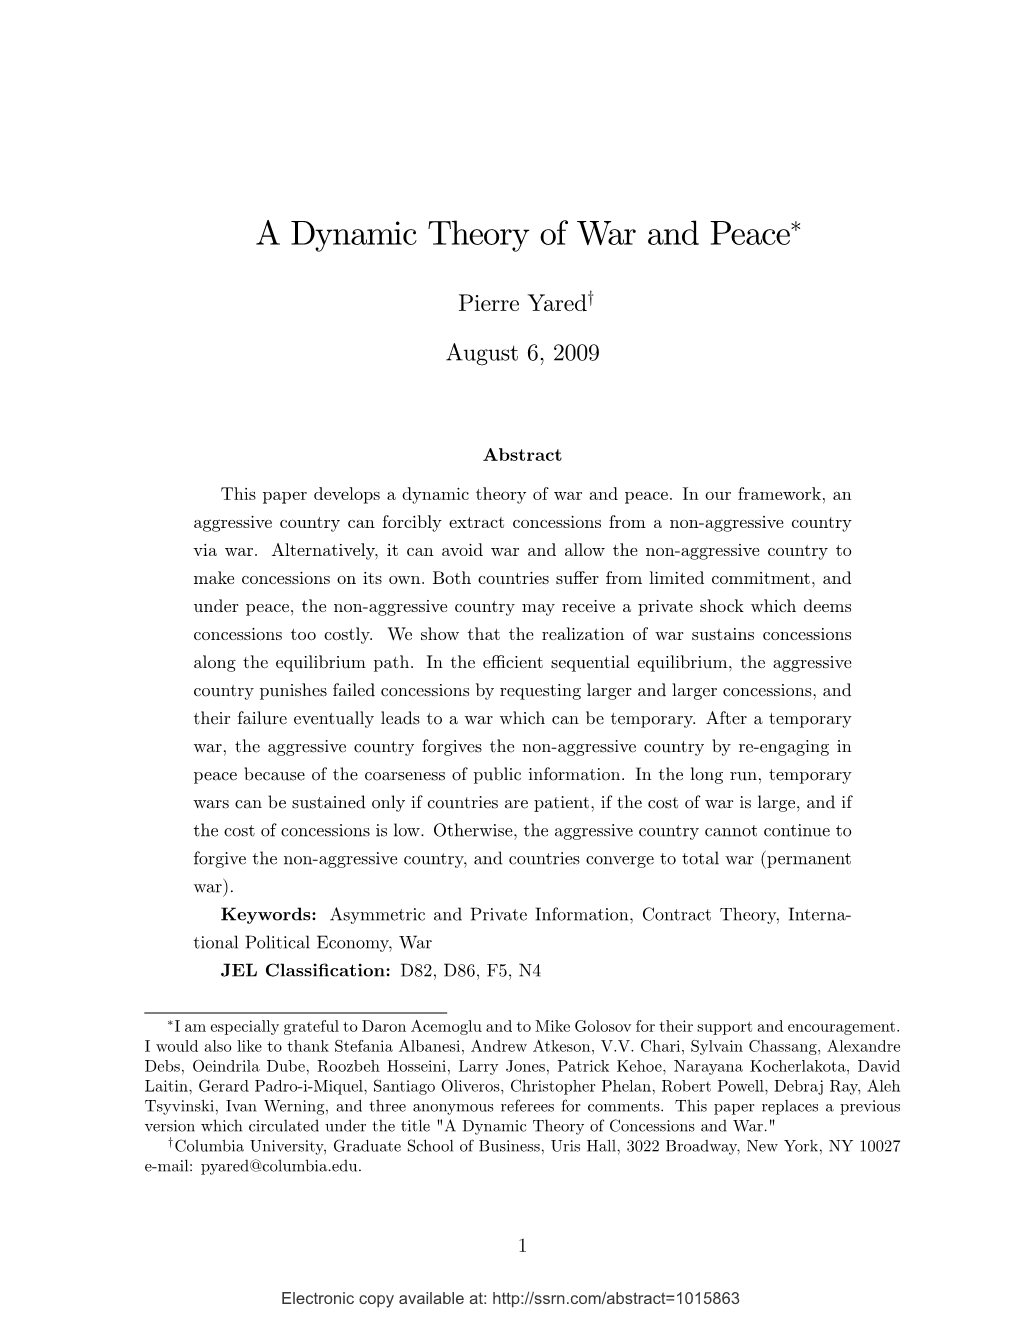 A Dynamic Theory of War and Peace"